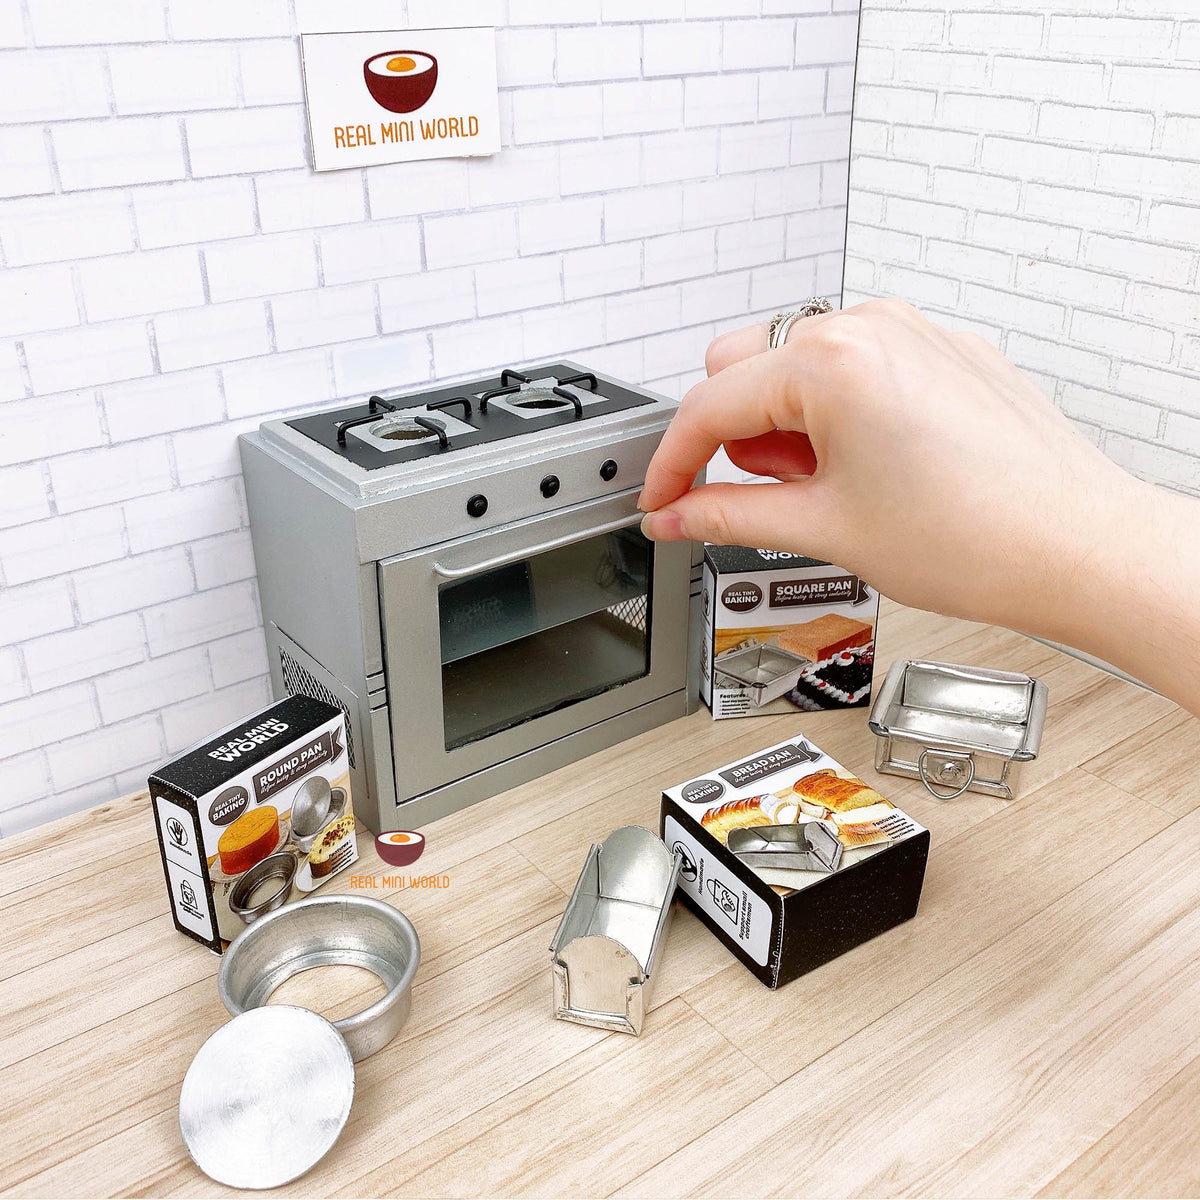 This Tiny Baking Kit Allows You To Make Tiny Foods Right In Your Own Oven